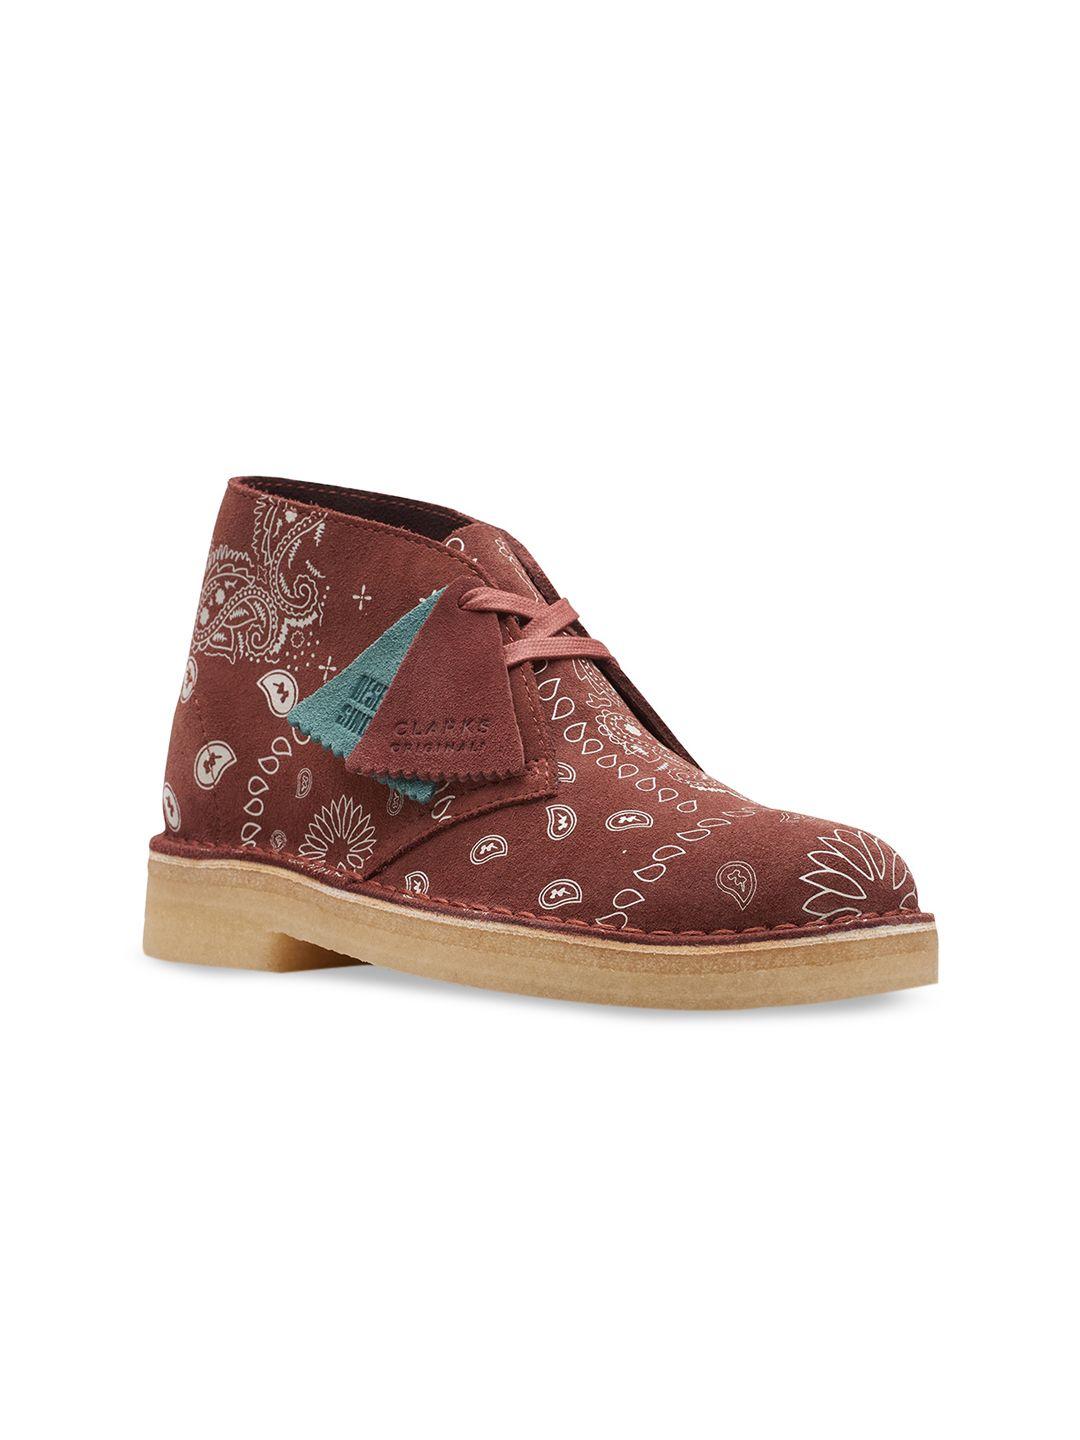 clarks women brown printed ankle desert boots